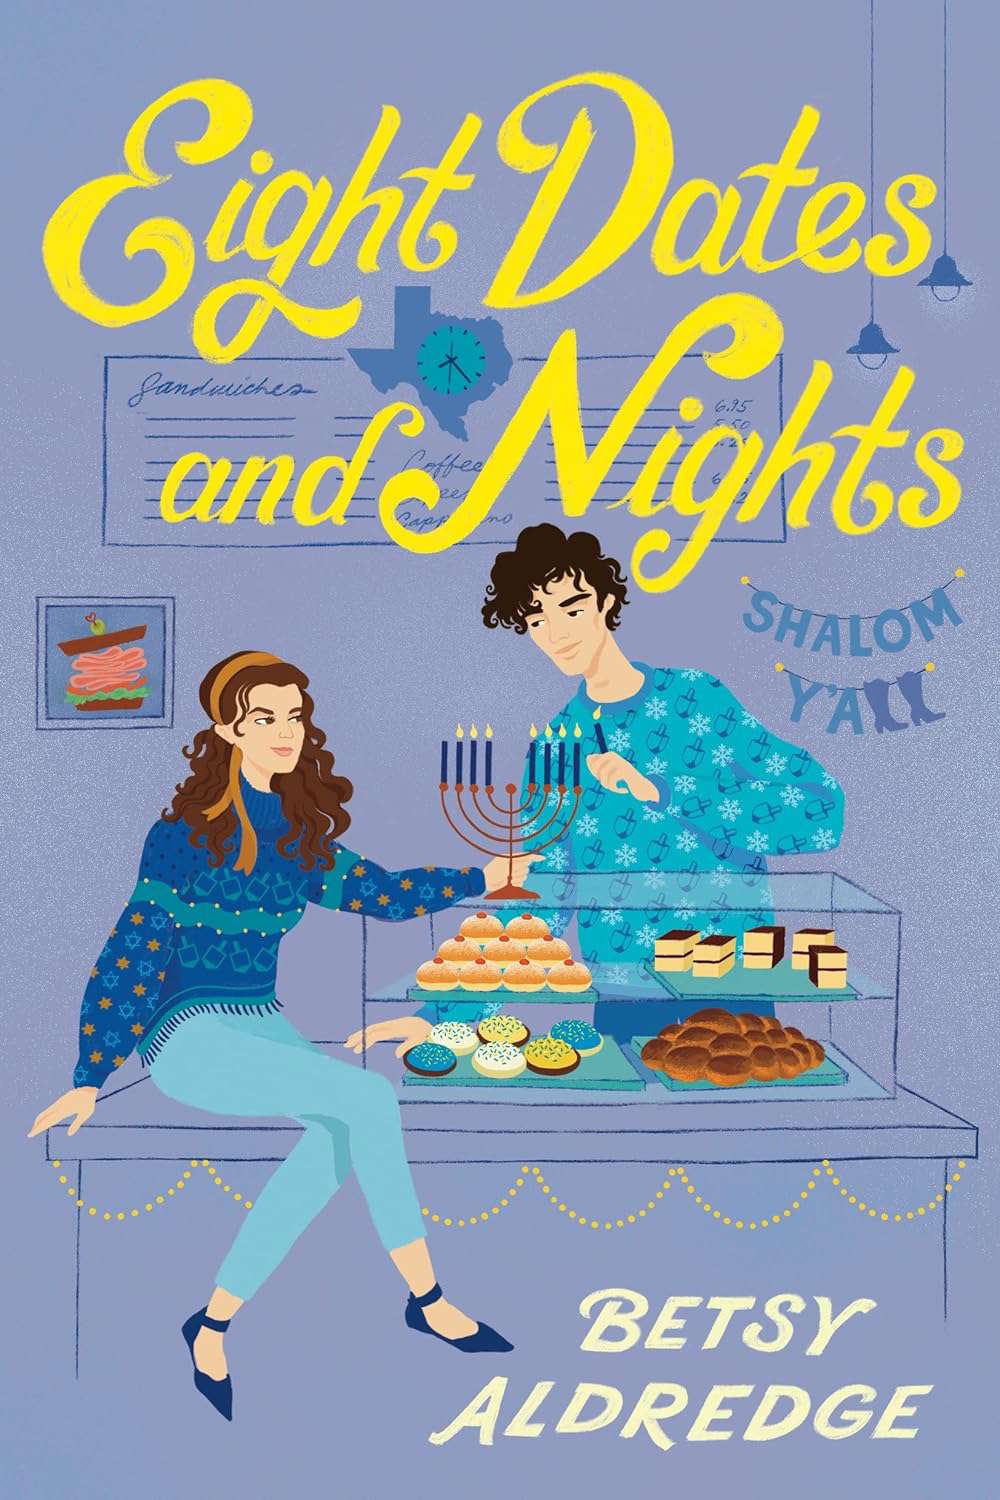 Eight Dates and Nights by Betsy Aldridge